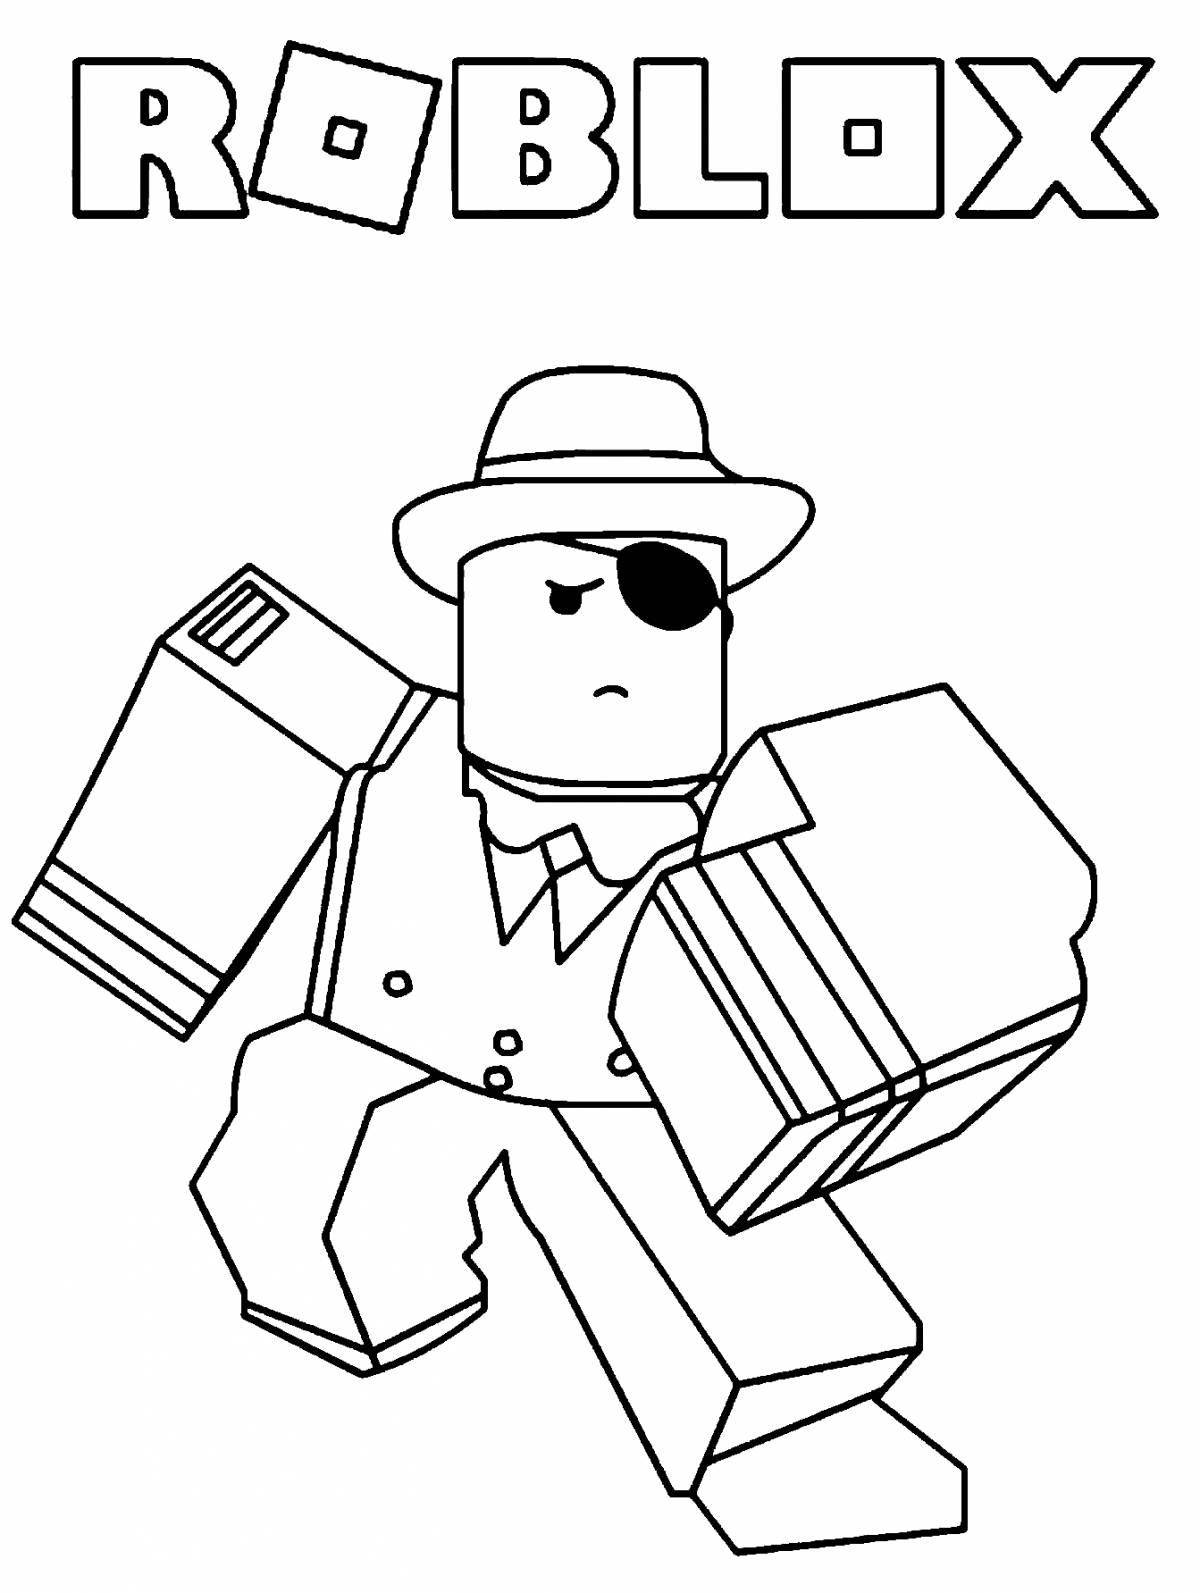 Charming roblox character coloring page